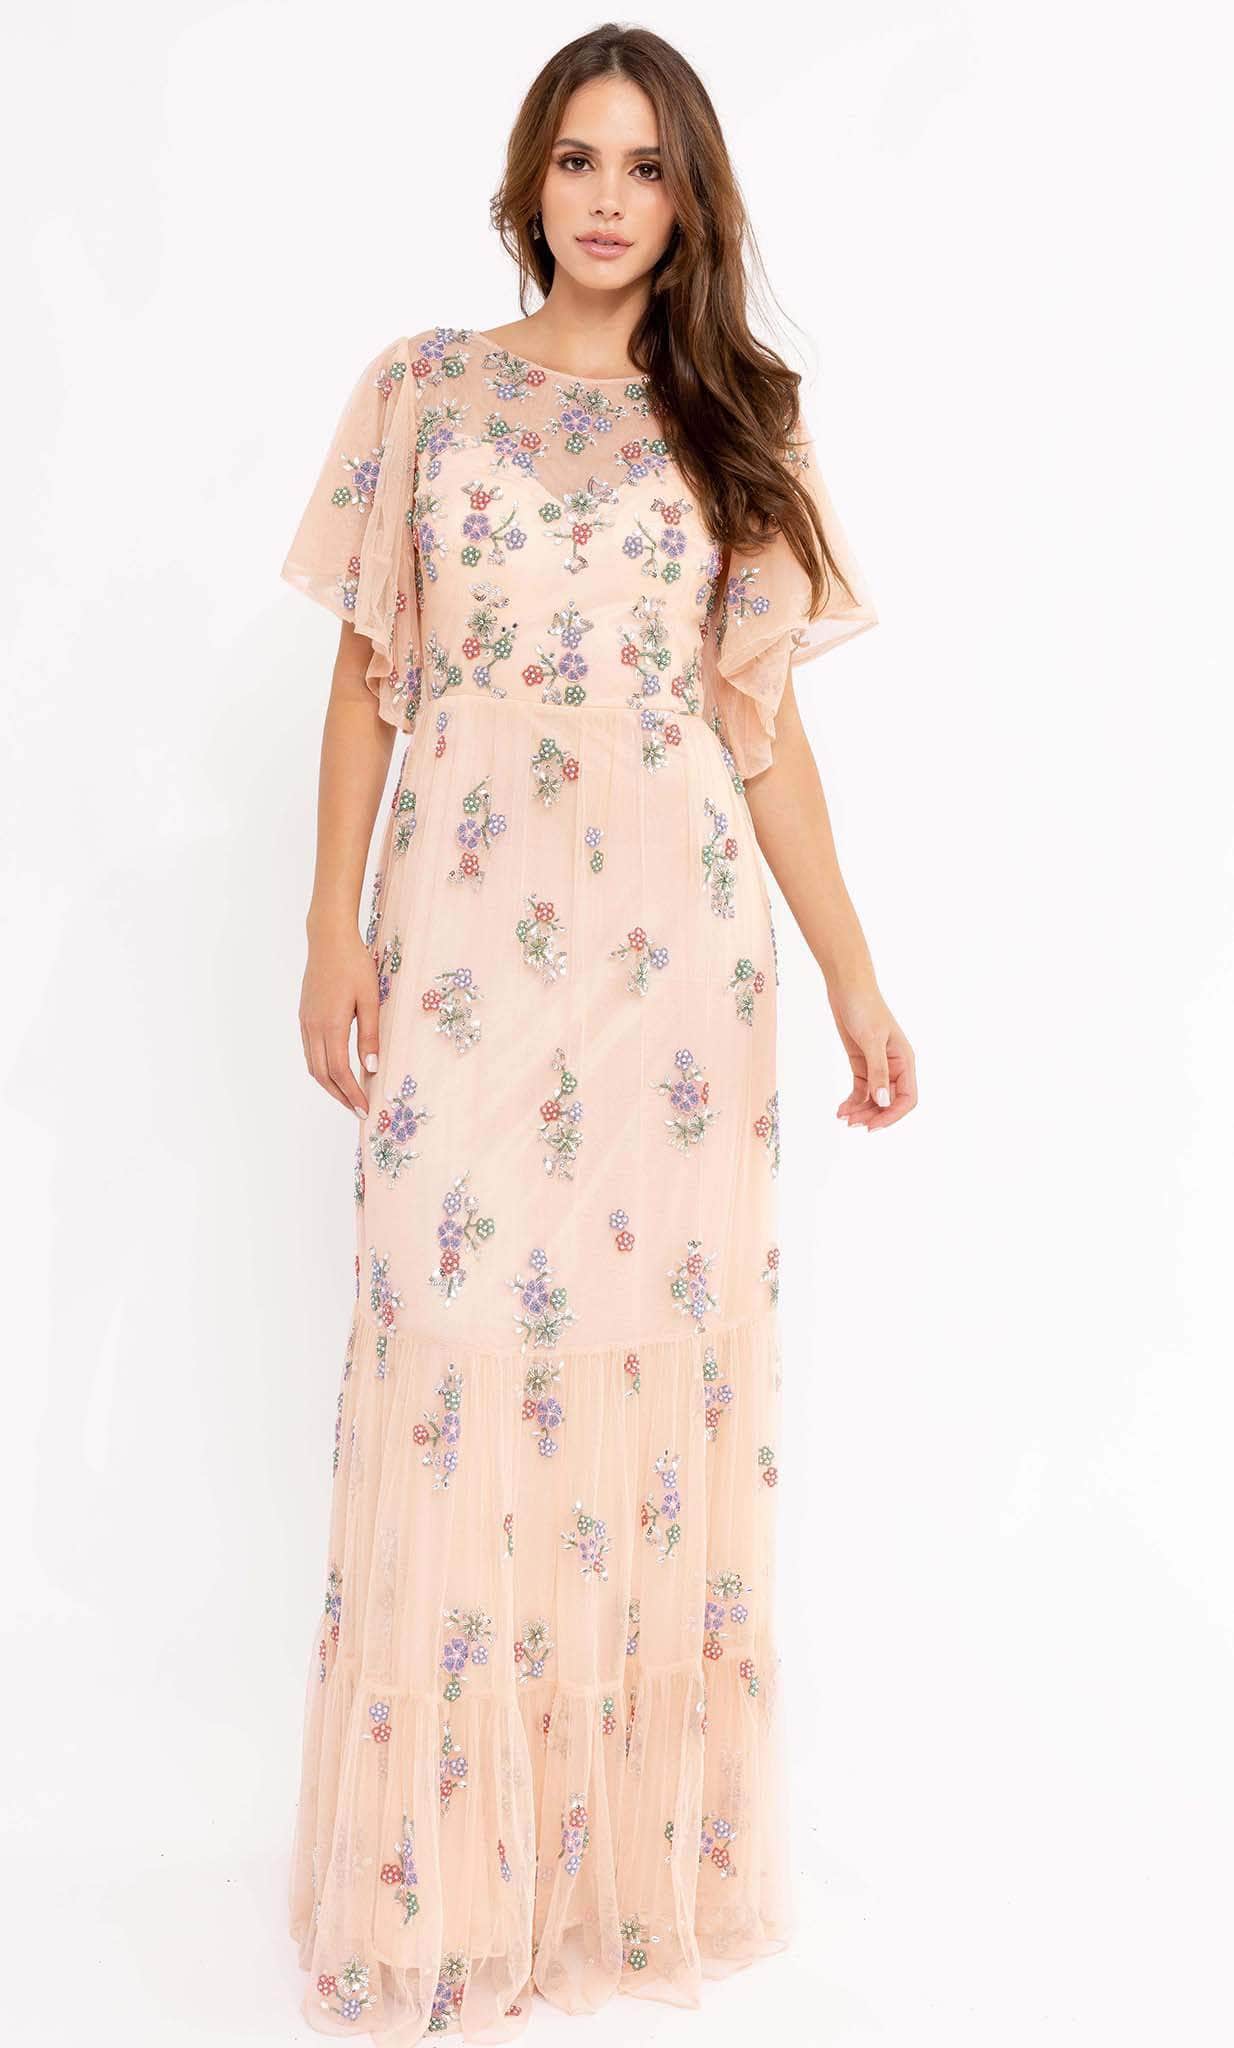 Primavera Couture 13108 - Soft-Looking Floral Long Dress Mother Of The Bride Dresses 4 / Blush